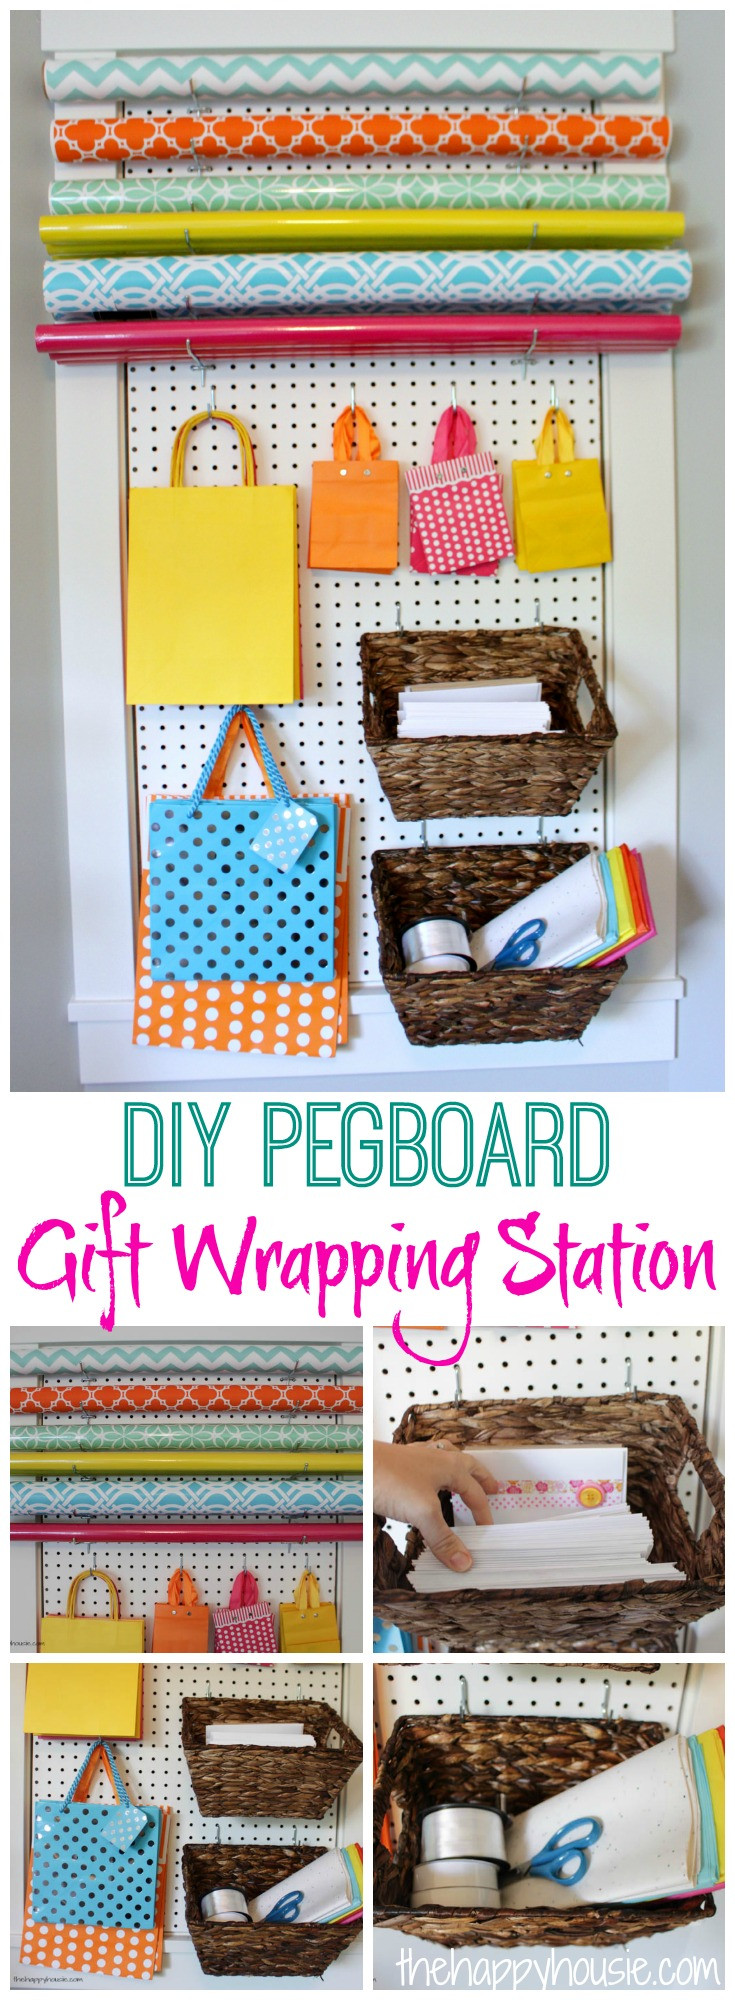 DIY Gift Wrap Station
 Craft Room Progress A Gift Wrapping Station ORC Week 2